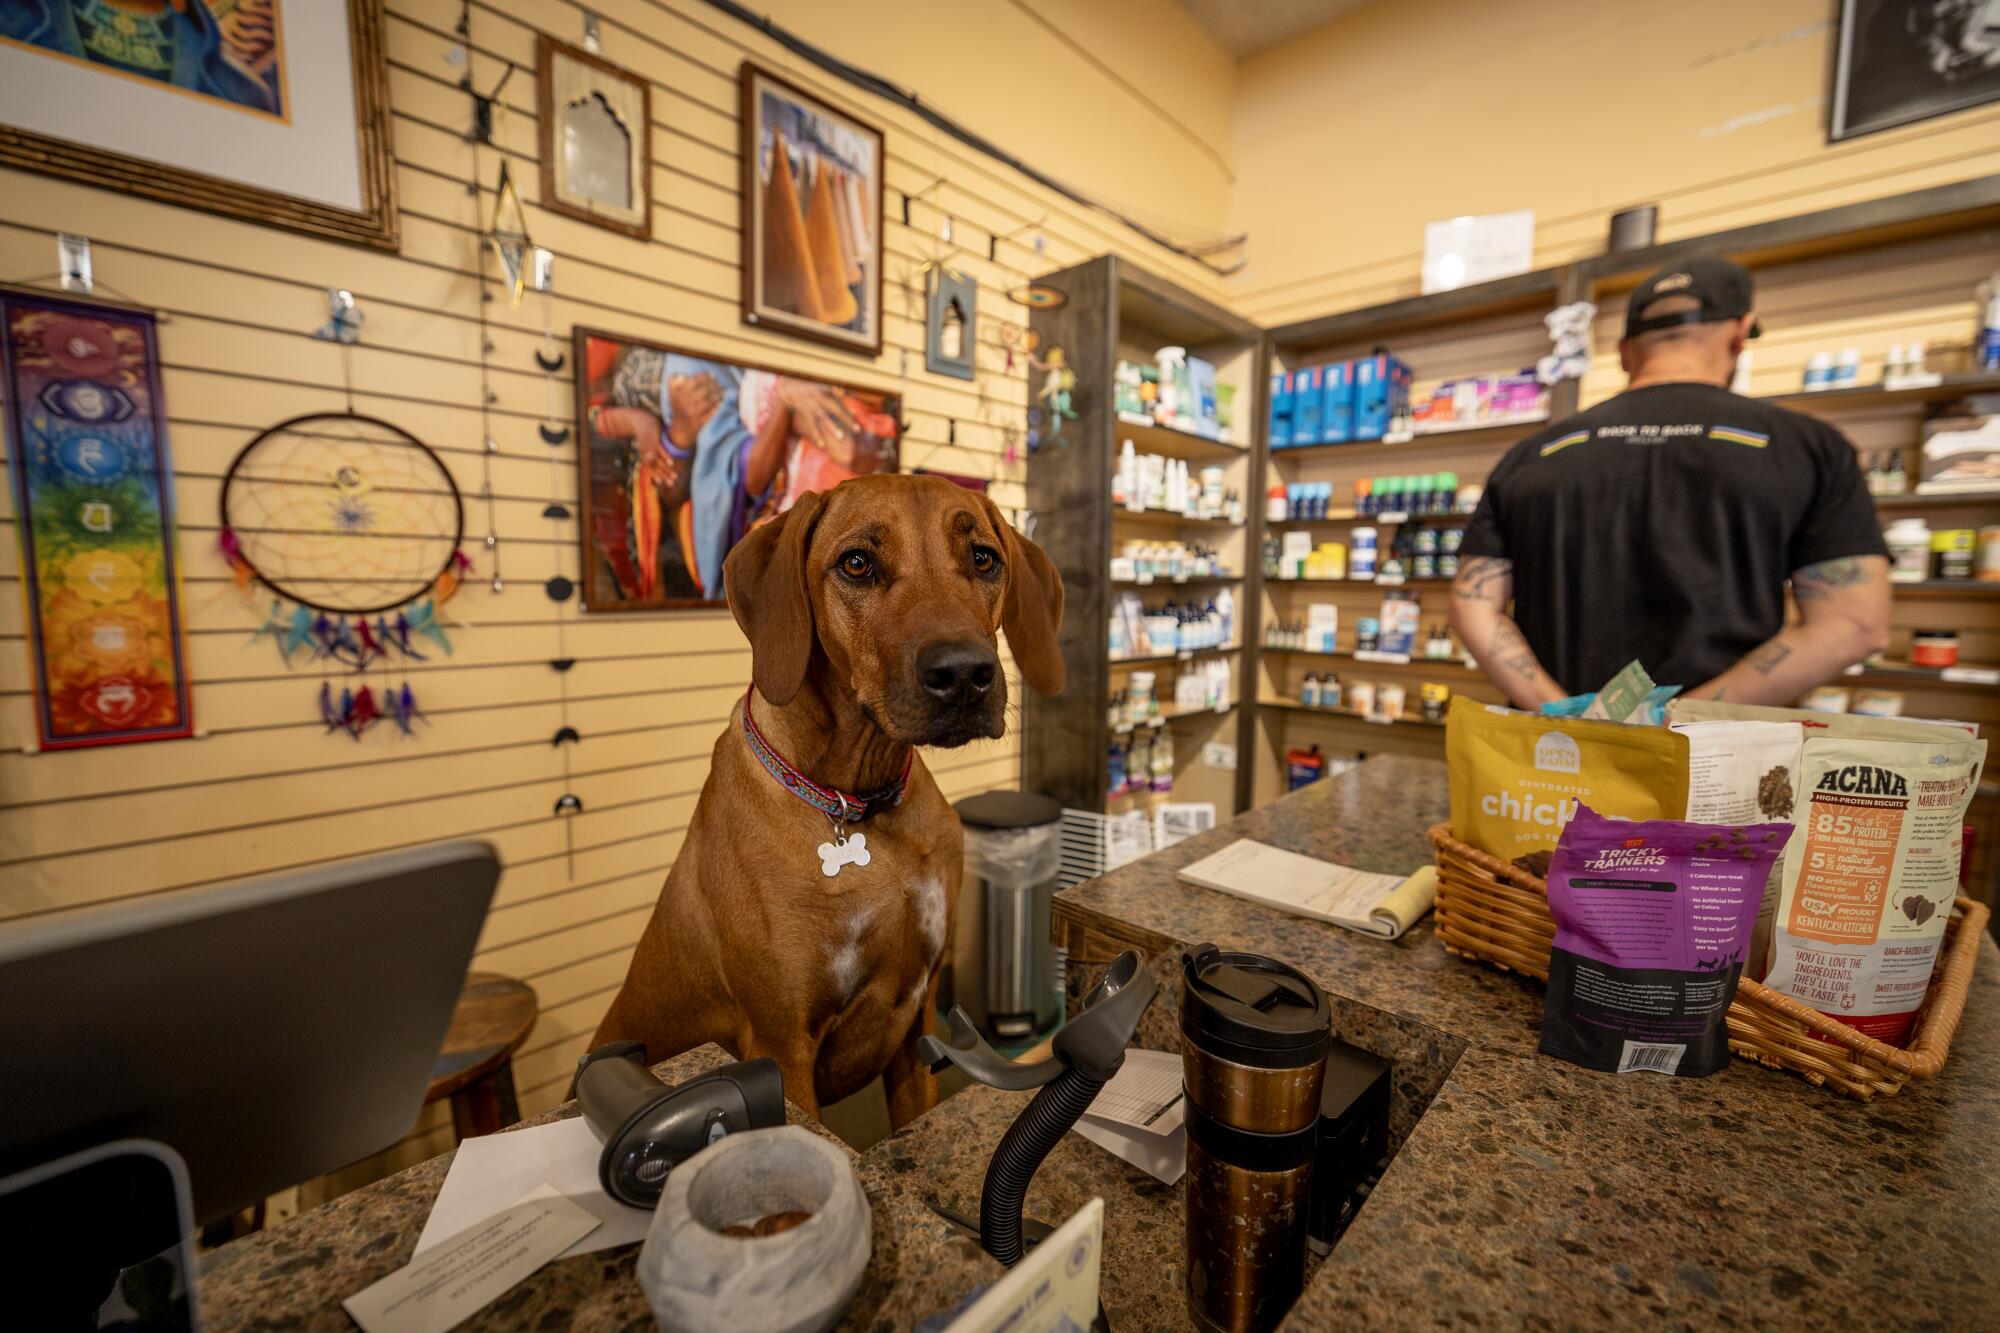 A dog sits behind a store counter.